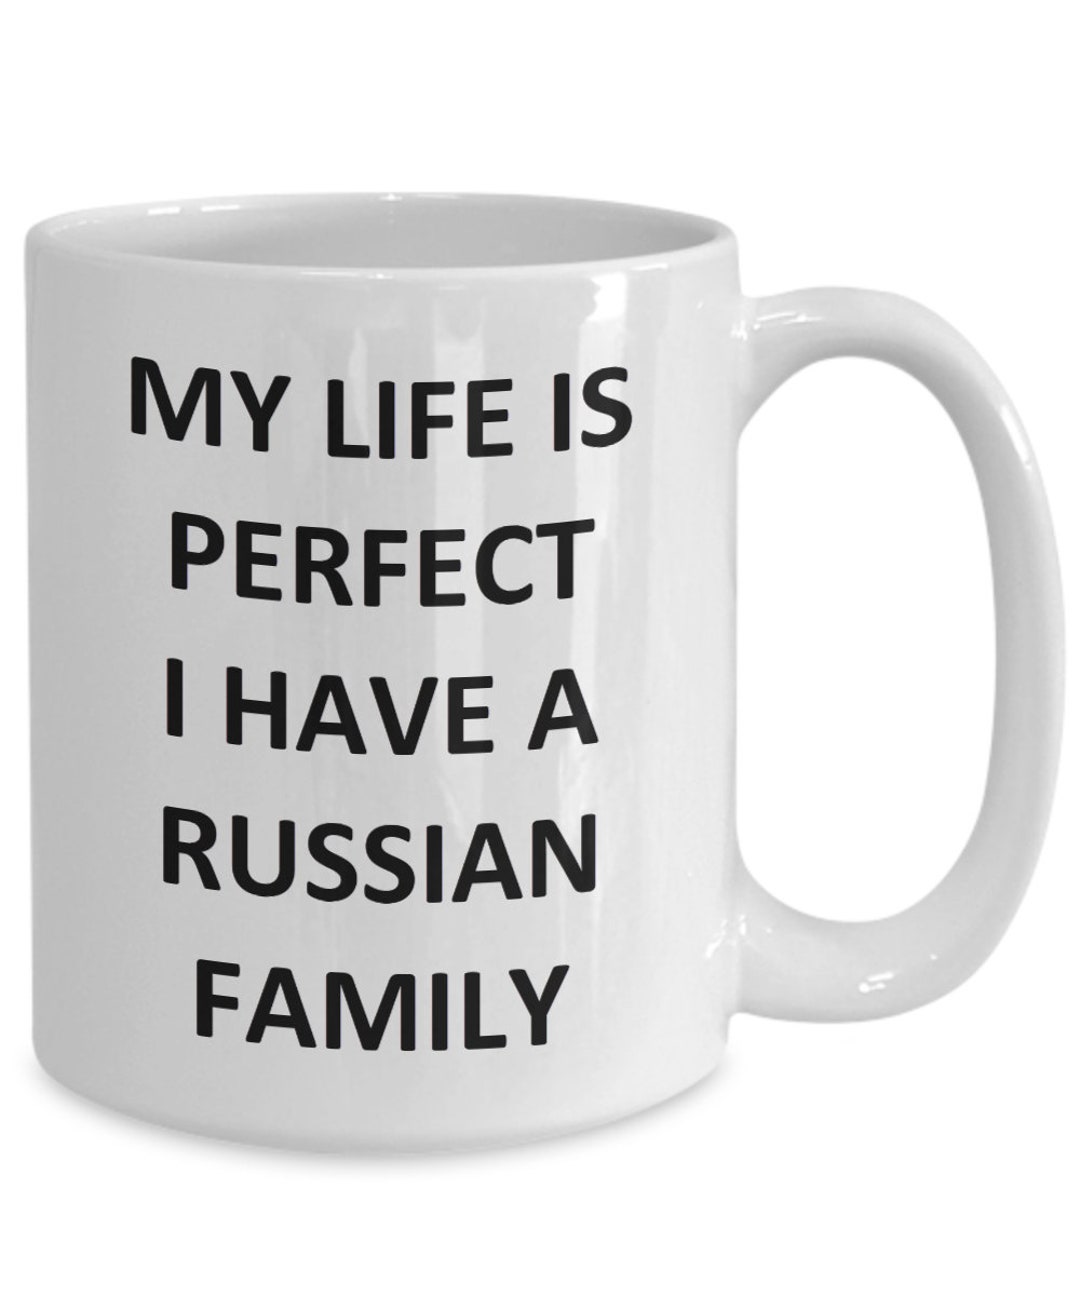 Russian Mug Family for Him Her Mom Dad Russia Friend Coffee